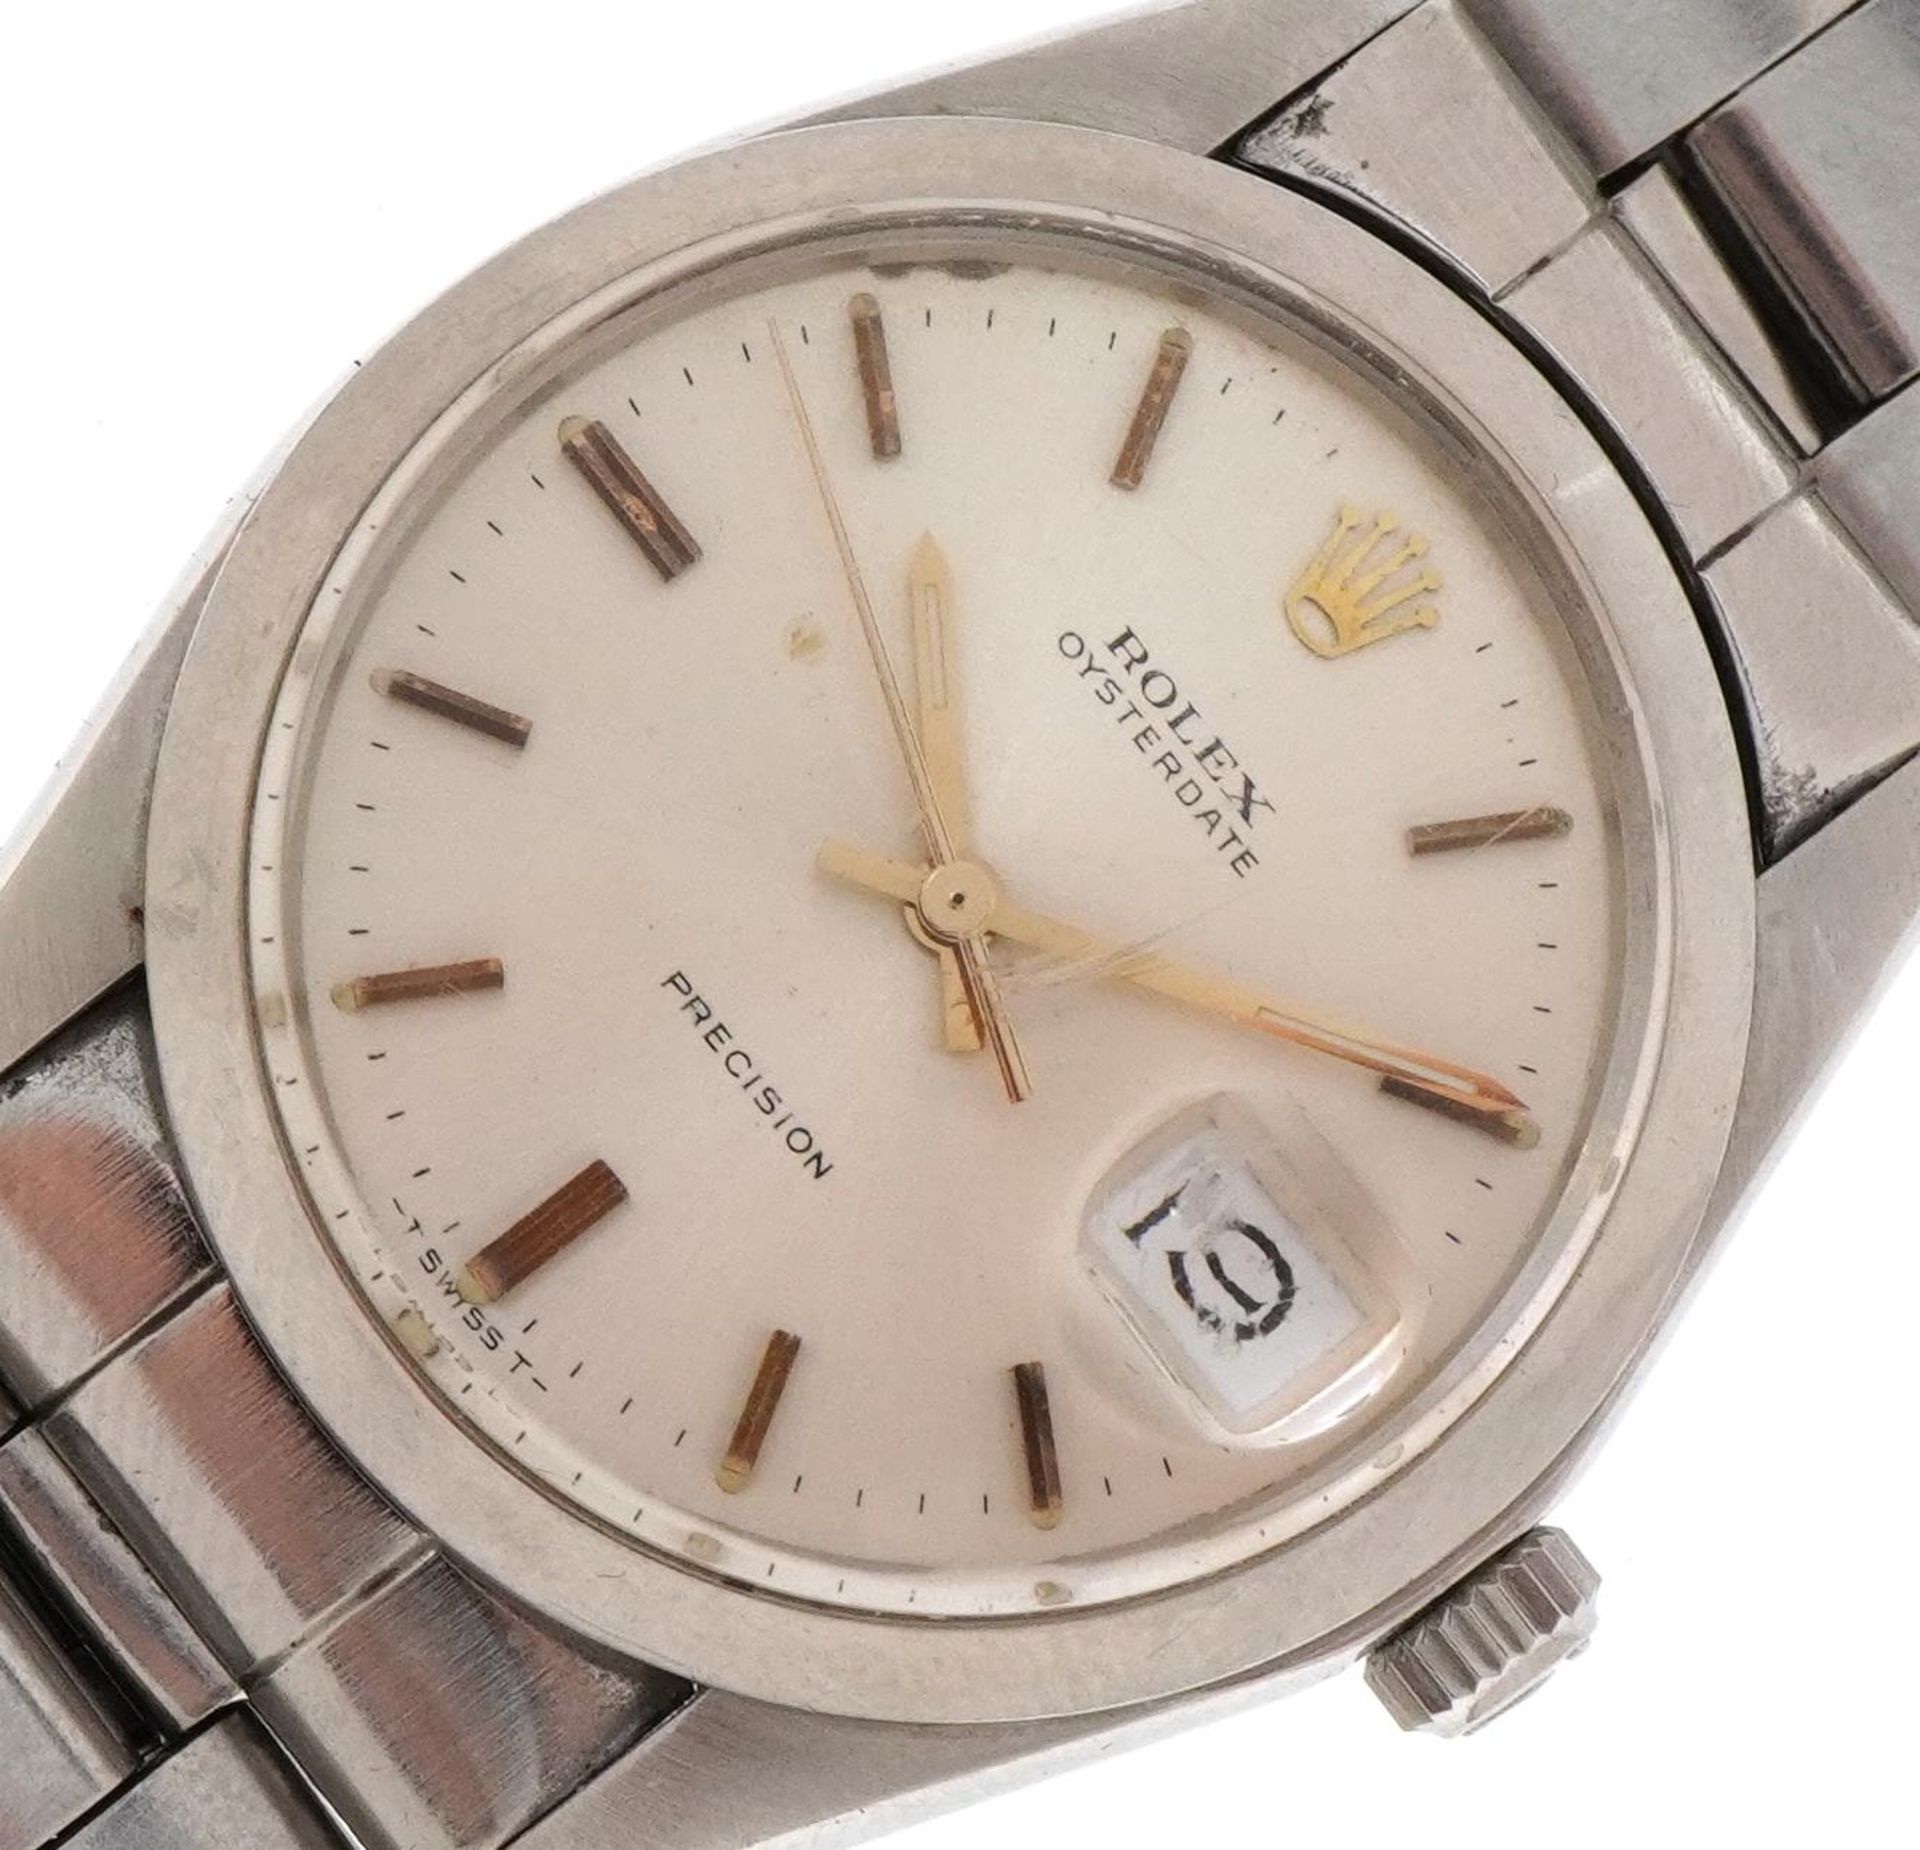 Rolex, gentlemen's Rolex Oysterdate wristwatch with certificate and paperwork housed in a Lassale